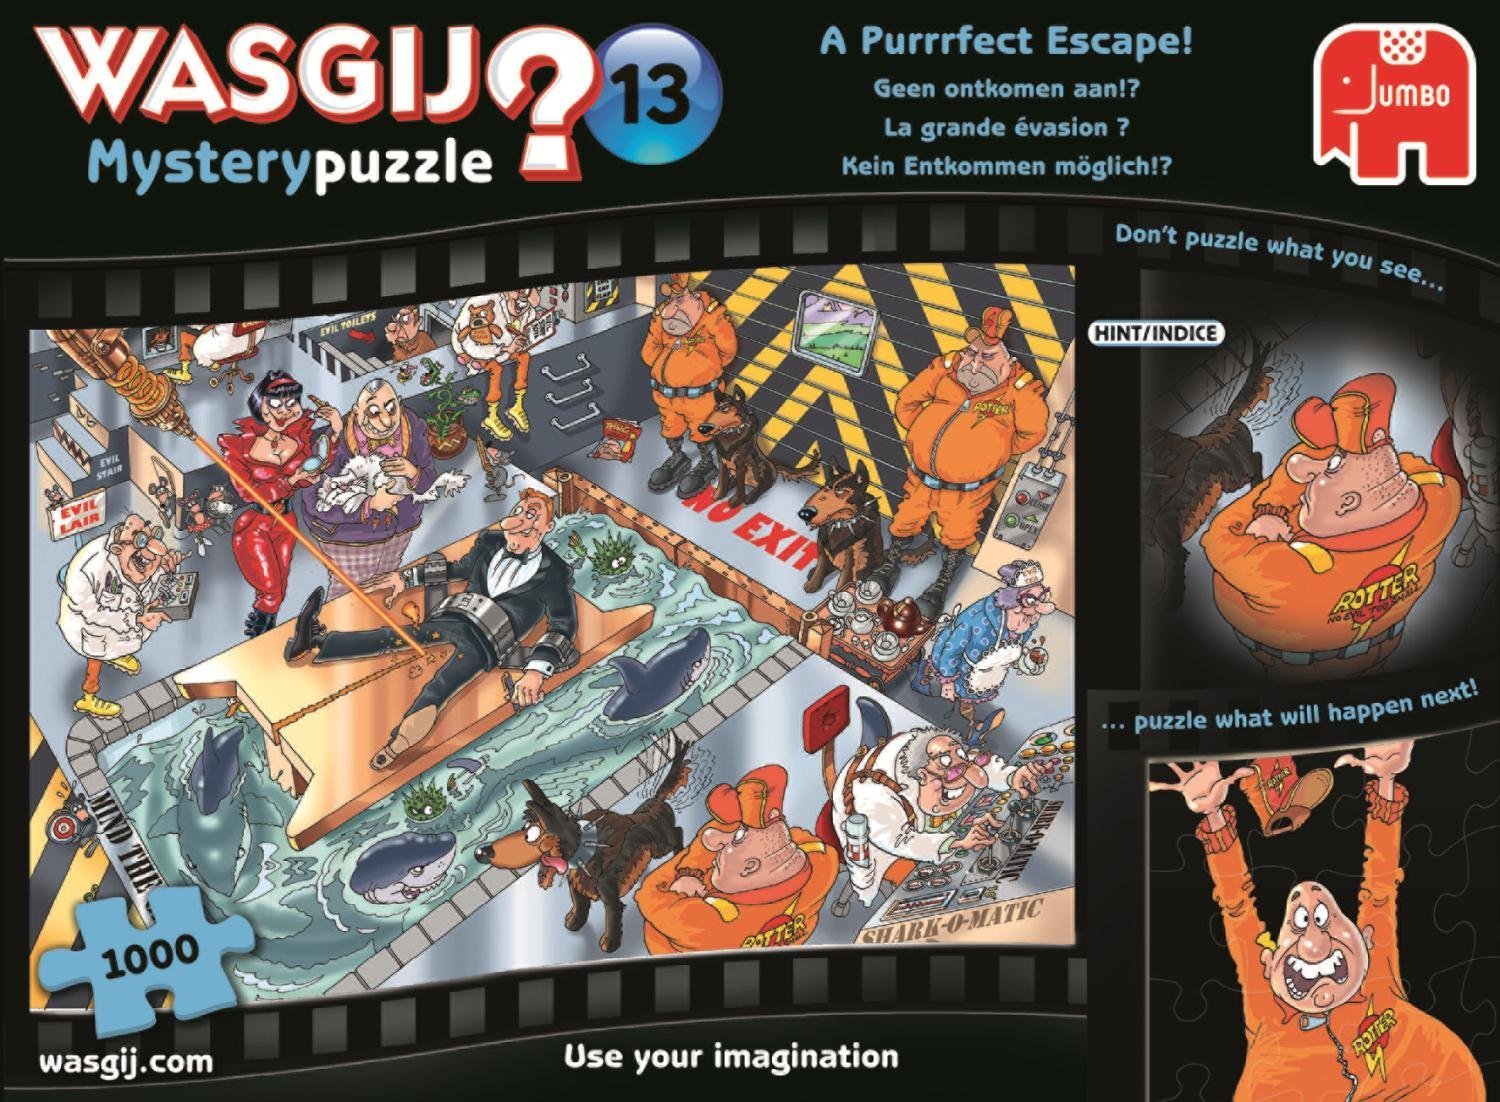 Buy Wasgij Mystery 13 'A Purrrfect Escape!' - 1000 Piece Jigsaw Puzzle